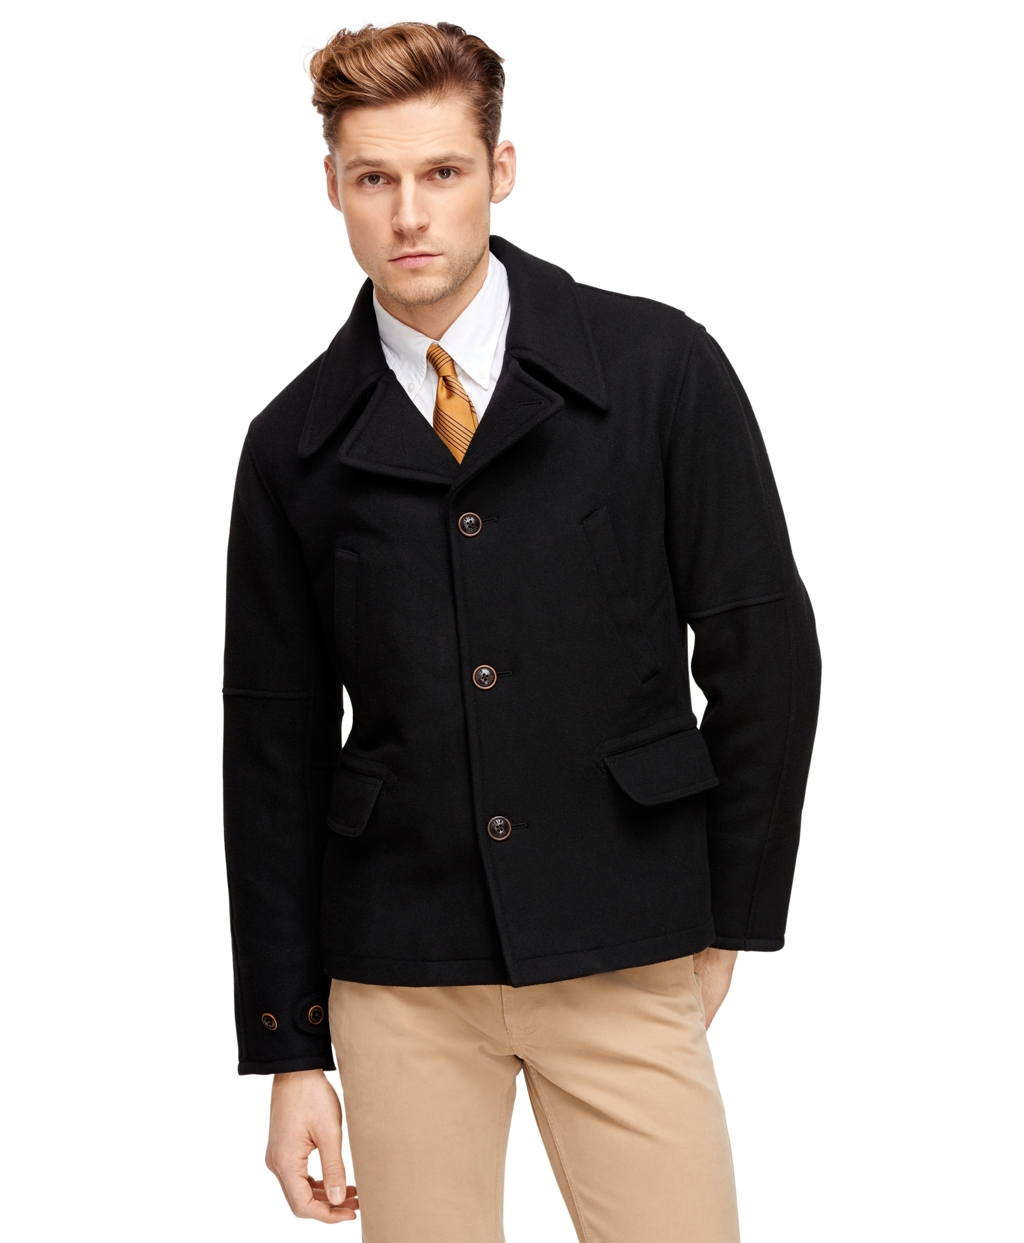 Lyst - Brooks Brothers Pea Coat in Black for Men